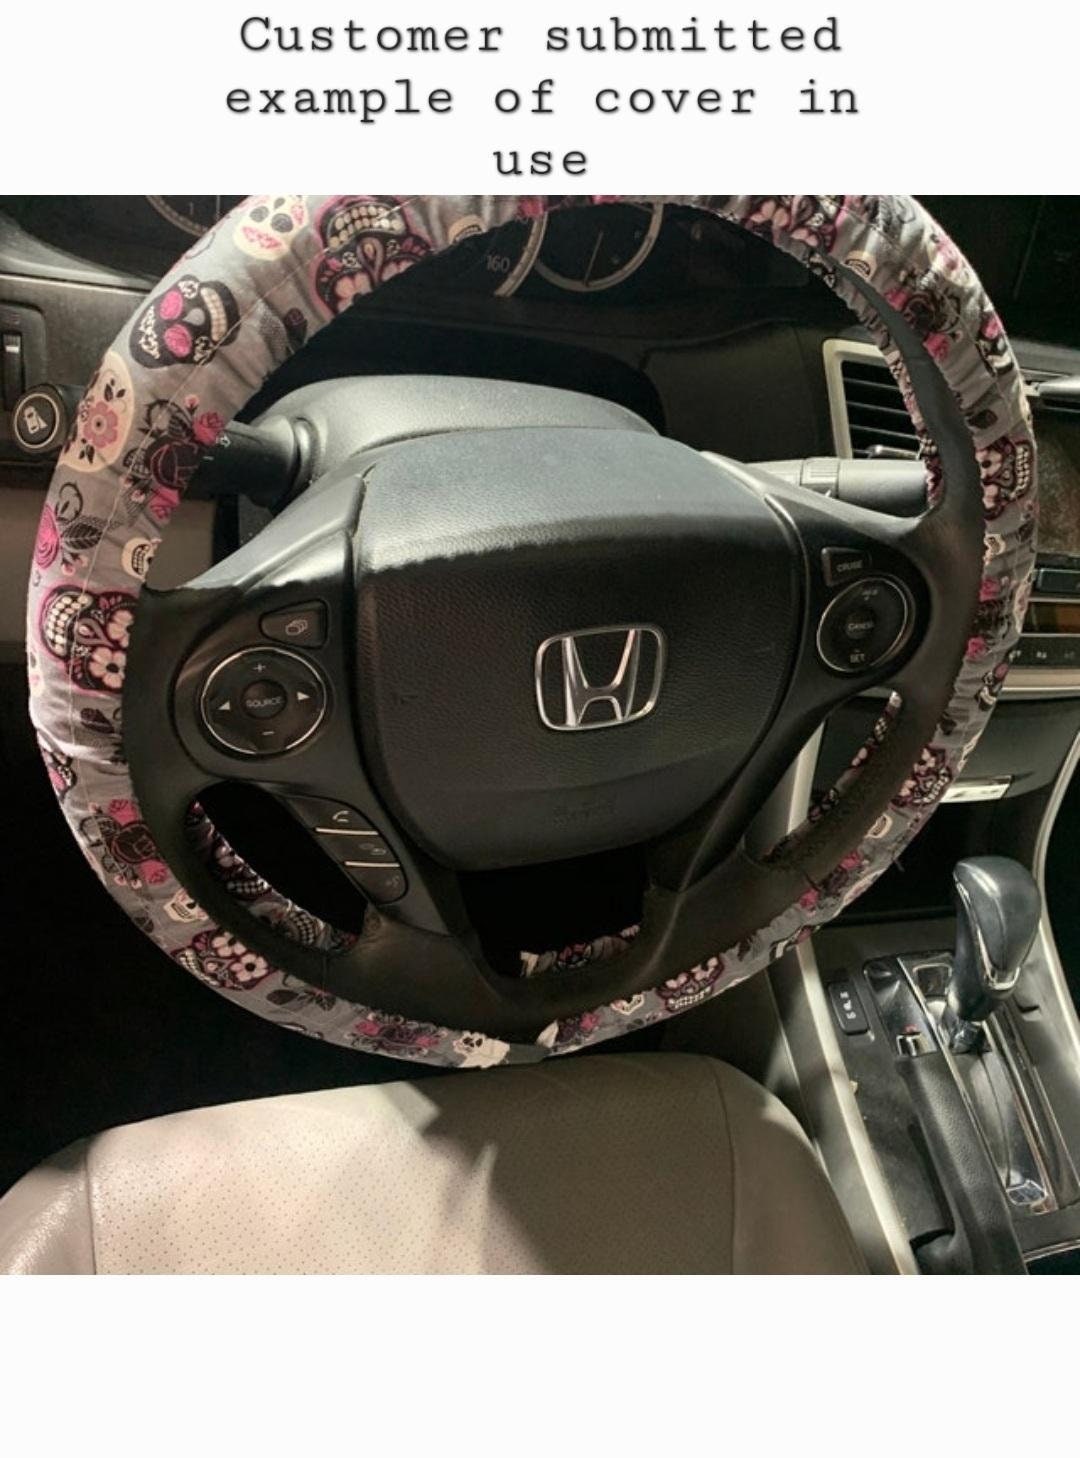 Cats Steering Wheel Cover, Cat Mom Gift, 100% Cotton Washable - Harlow's Store and Garden Gifts